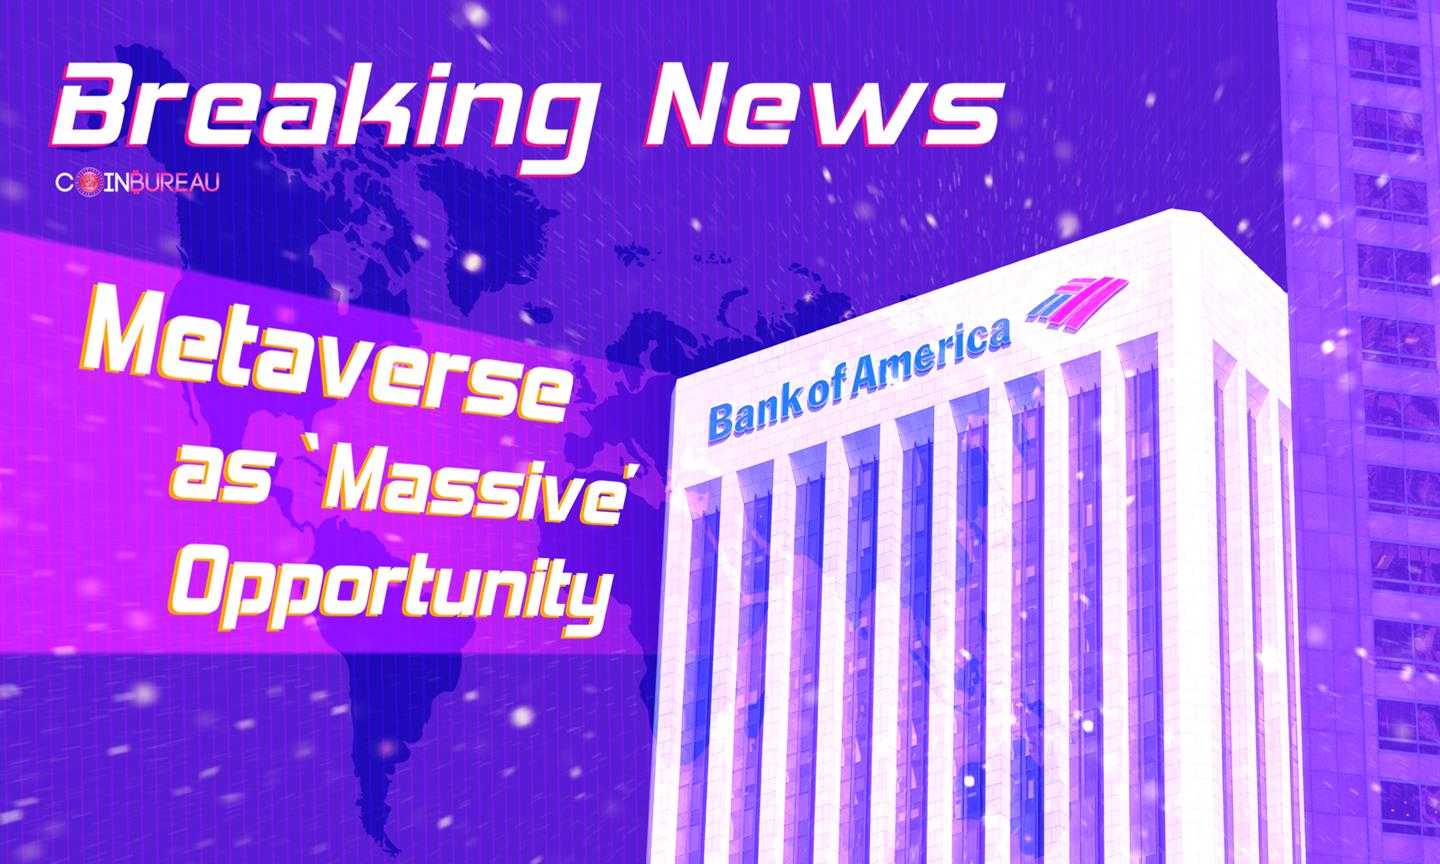 Bank of America Names Metaverse as ‘Massive’ Opportunity